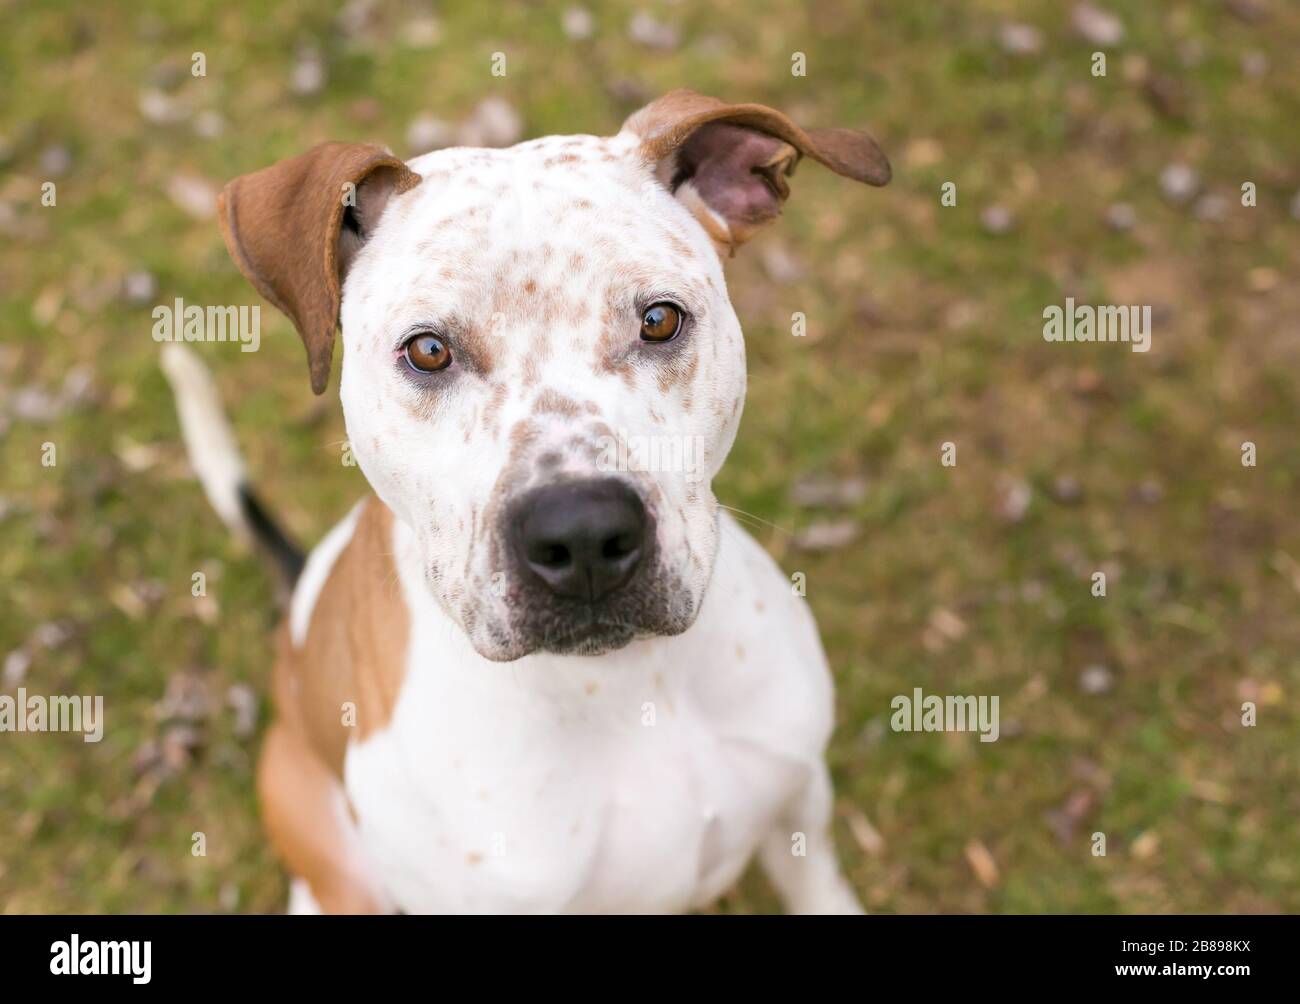 A Catahoula Leopard Dog x Pit Bull Terrier mixed breed dog with freckles on its face and floppy ears Stock Photo